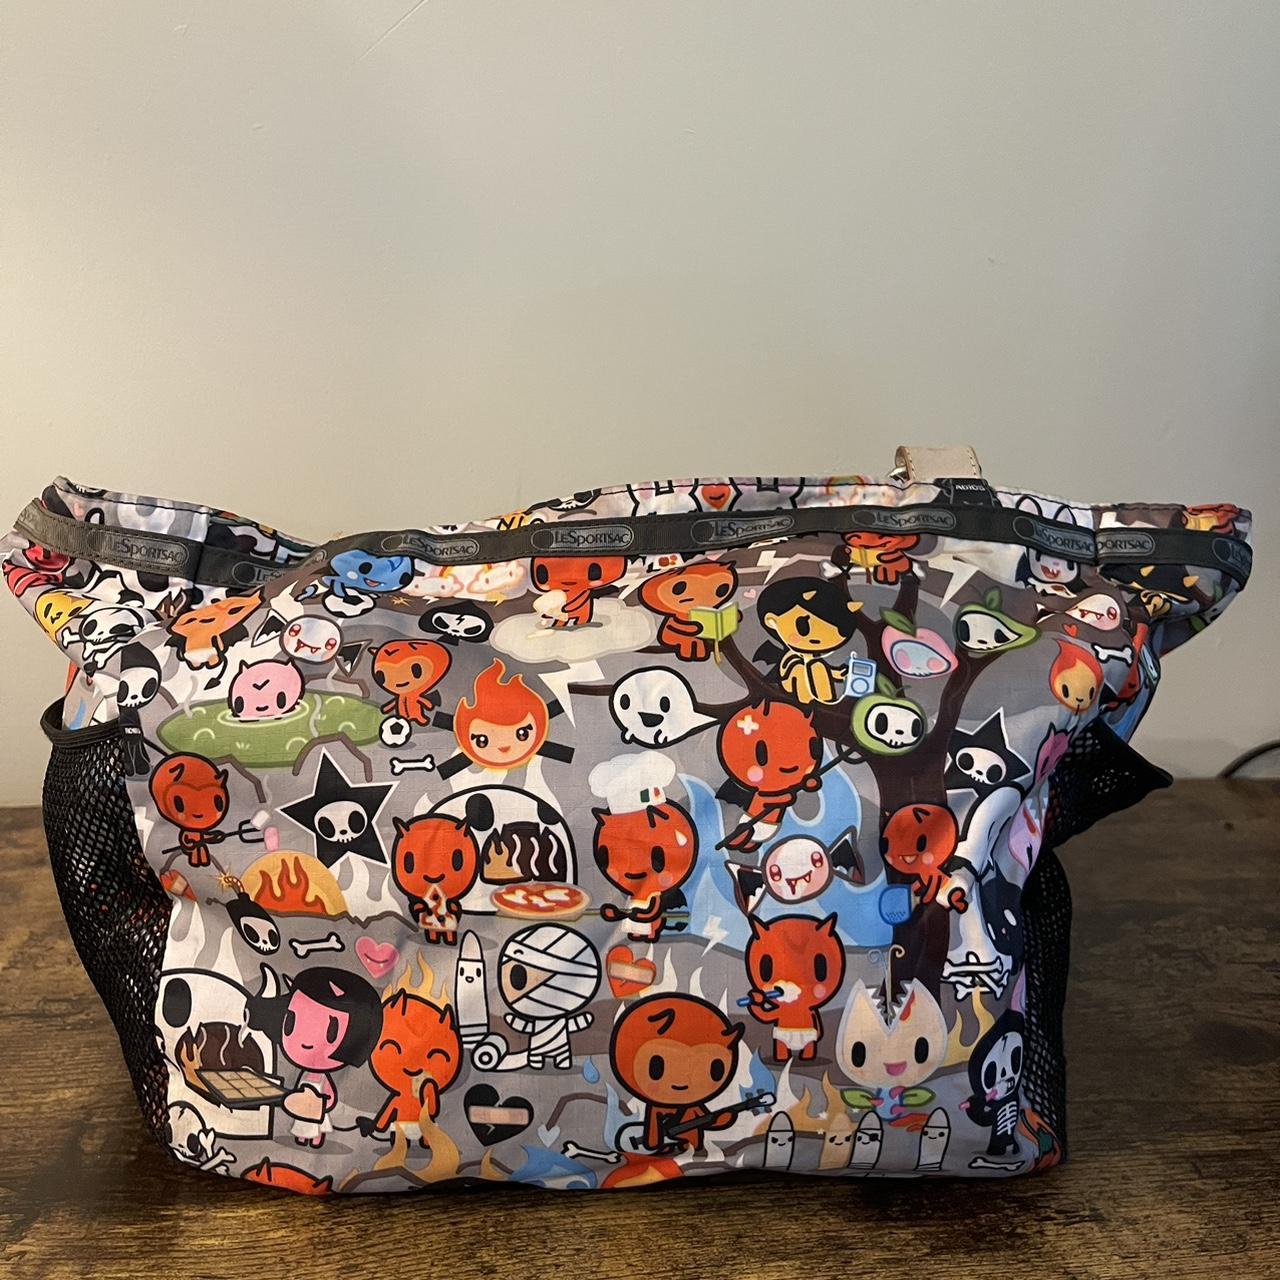 y2k RARE collapsable/ foldable lesportsac tote bag - Depop